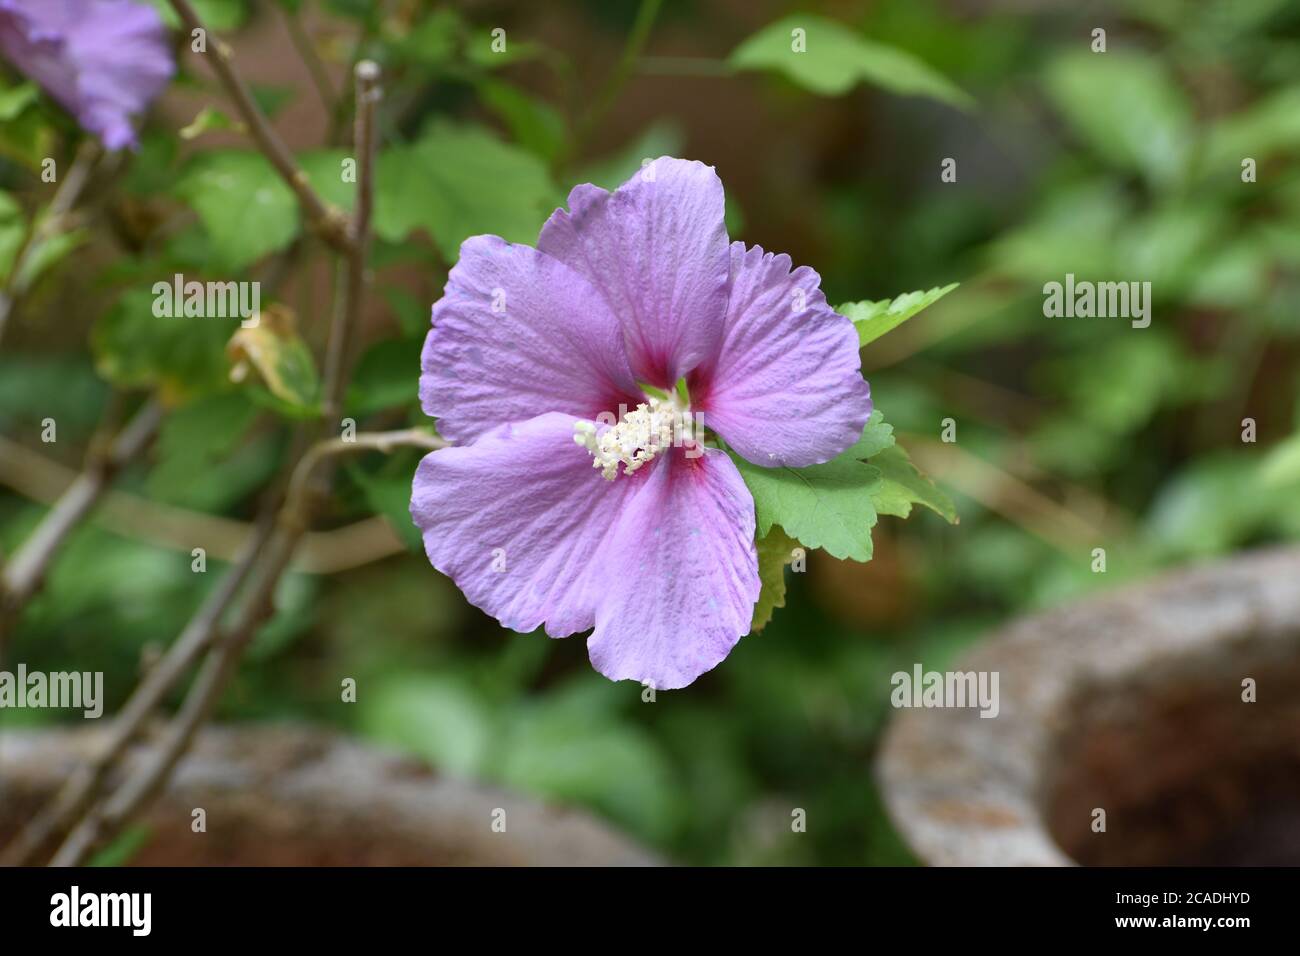 violet hibiscus in a blurry background Stock Photo